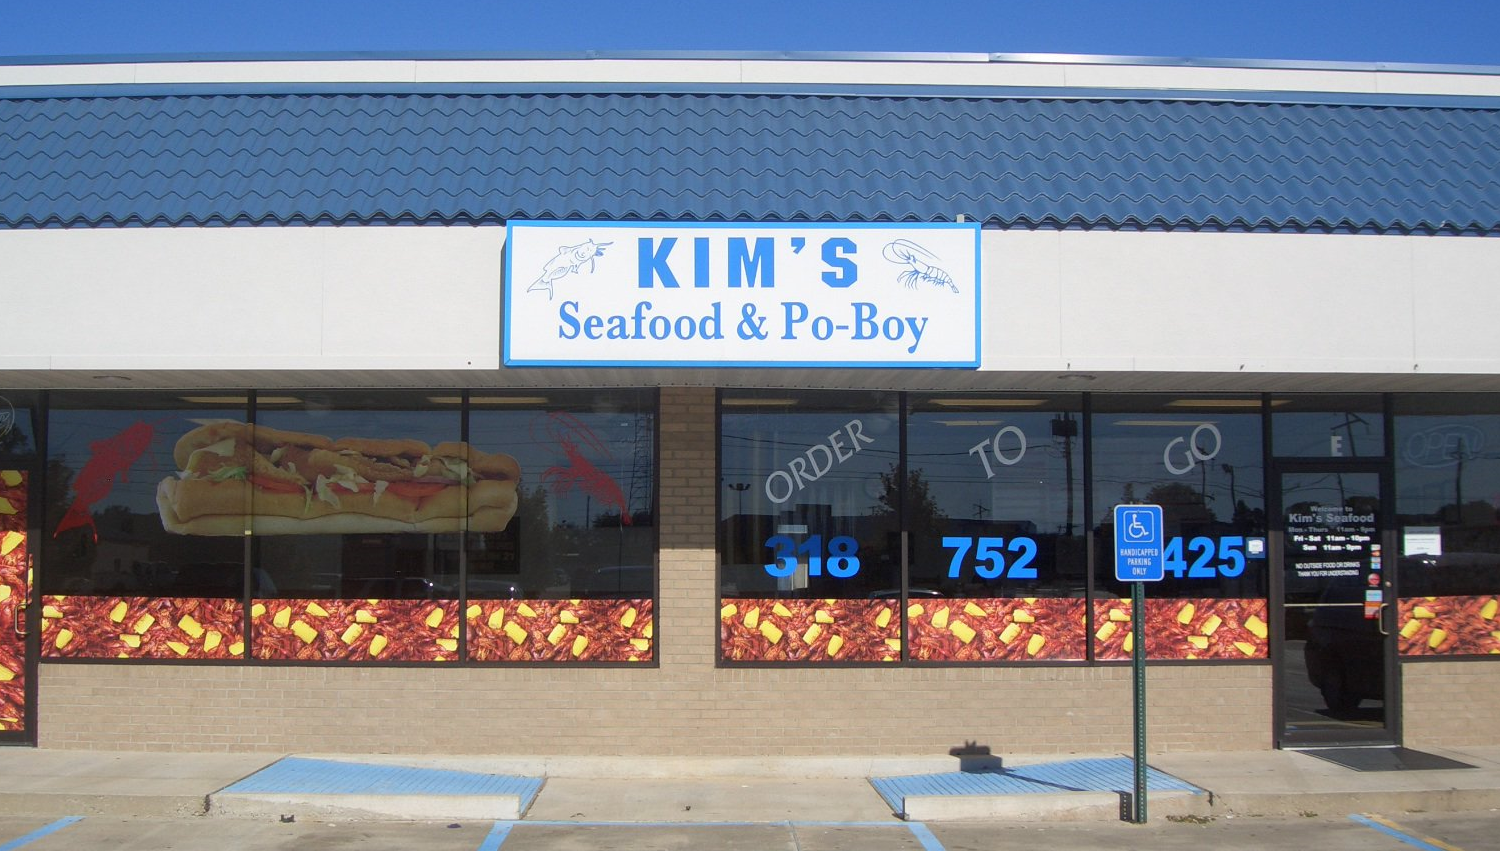 Kim's Seafood in Bossier